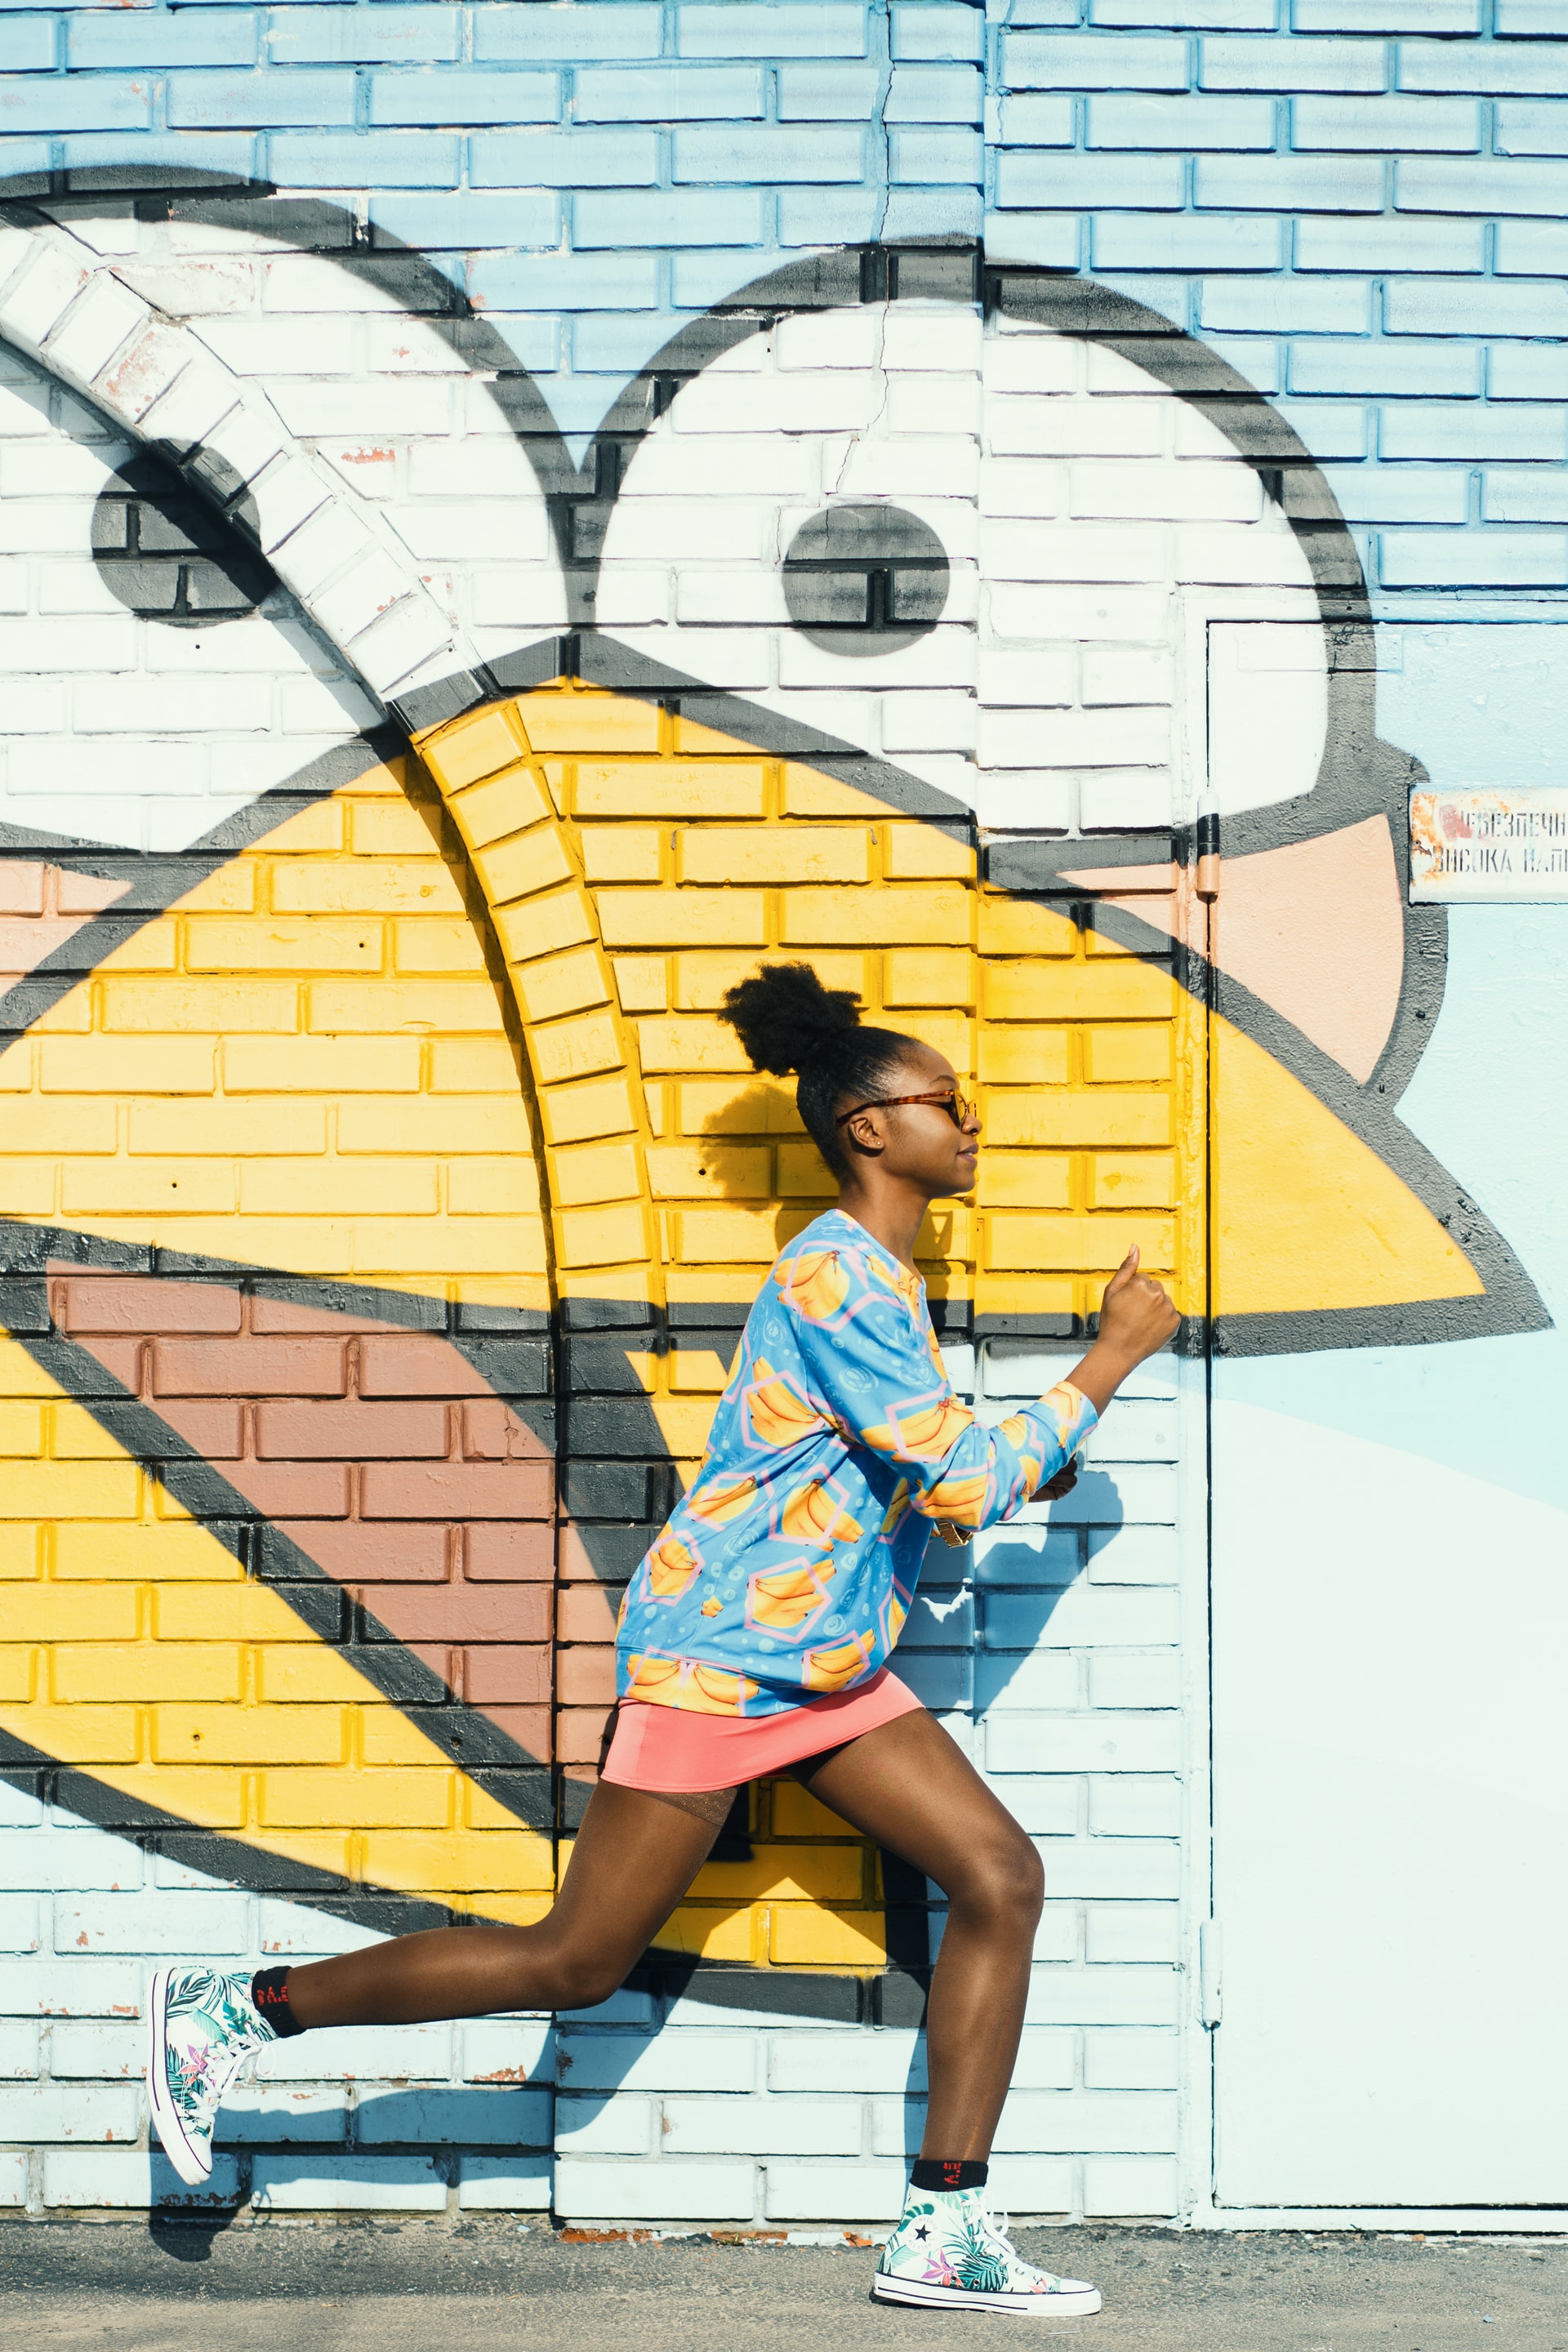 Girl jogging in front of brick wall that has a painted picture of a bird face with a yellow beak and white bulging eyes.